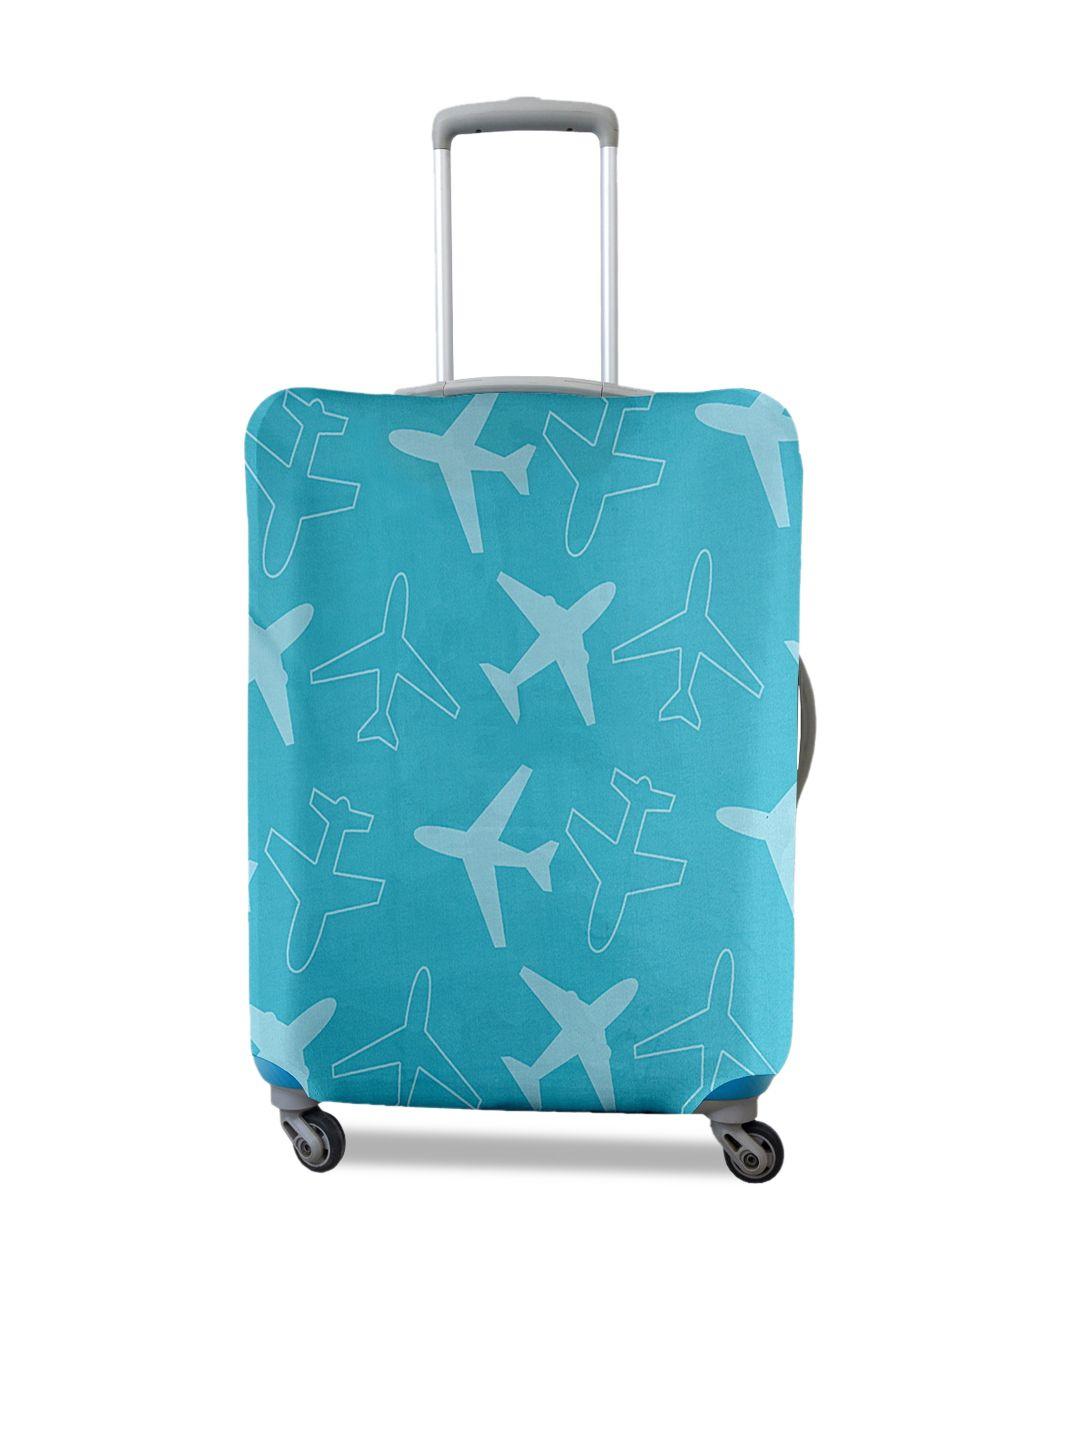 cortina blue printed protective small trolley bag cover